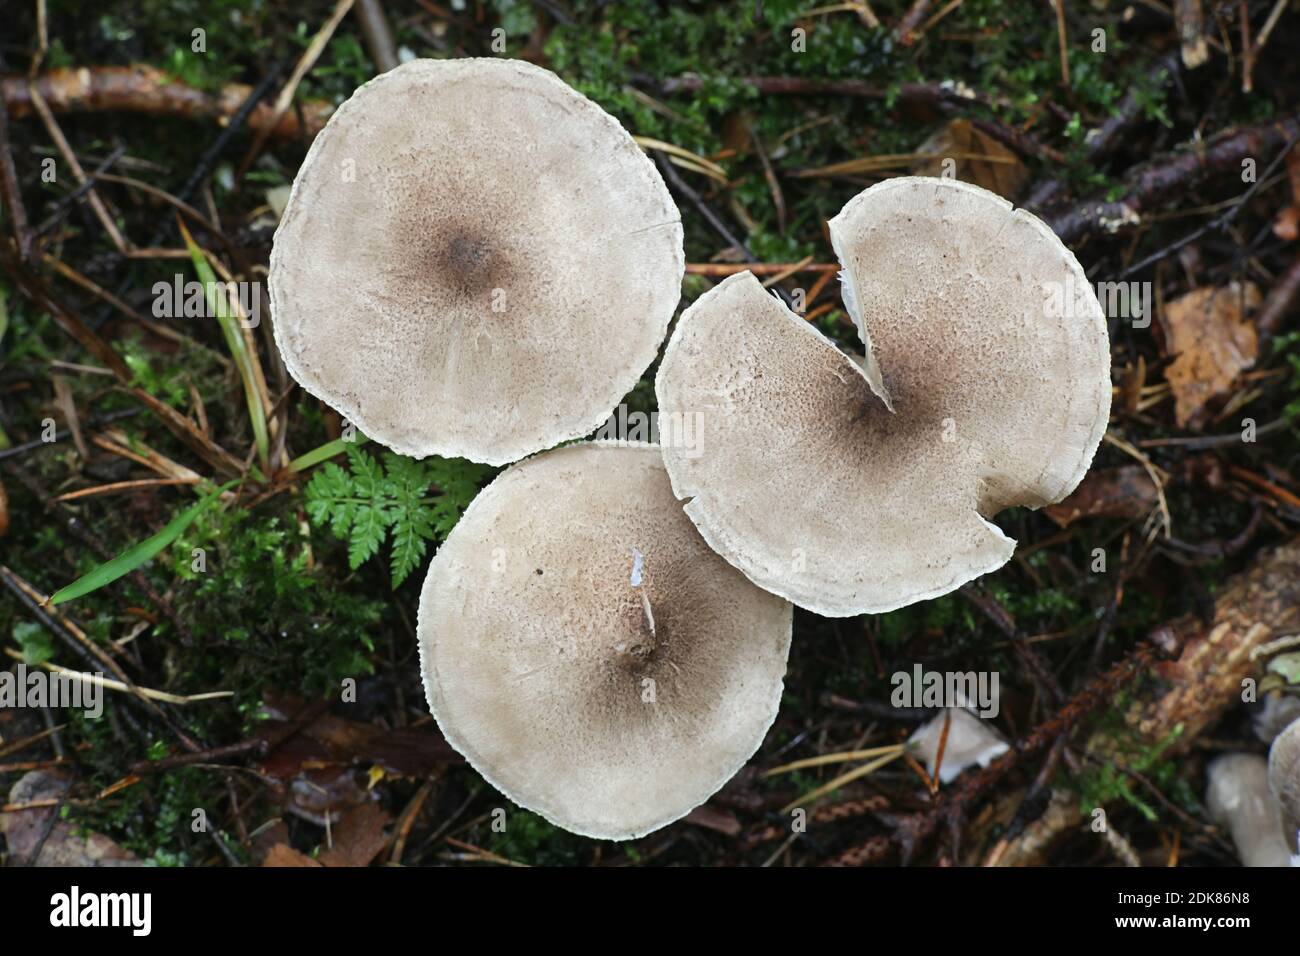 Tricholoma scalpturatum, known as the Yellowing Knight, wild mushroom from Finland Stock Photo